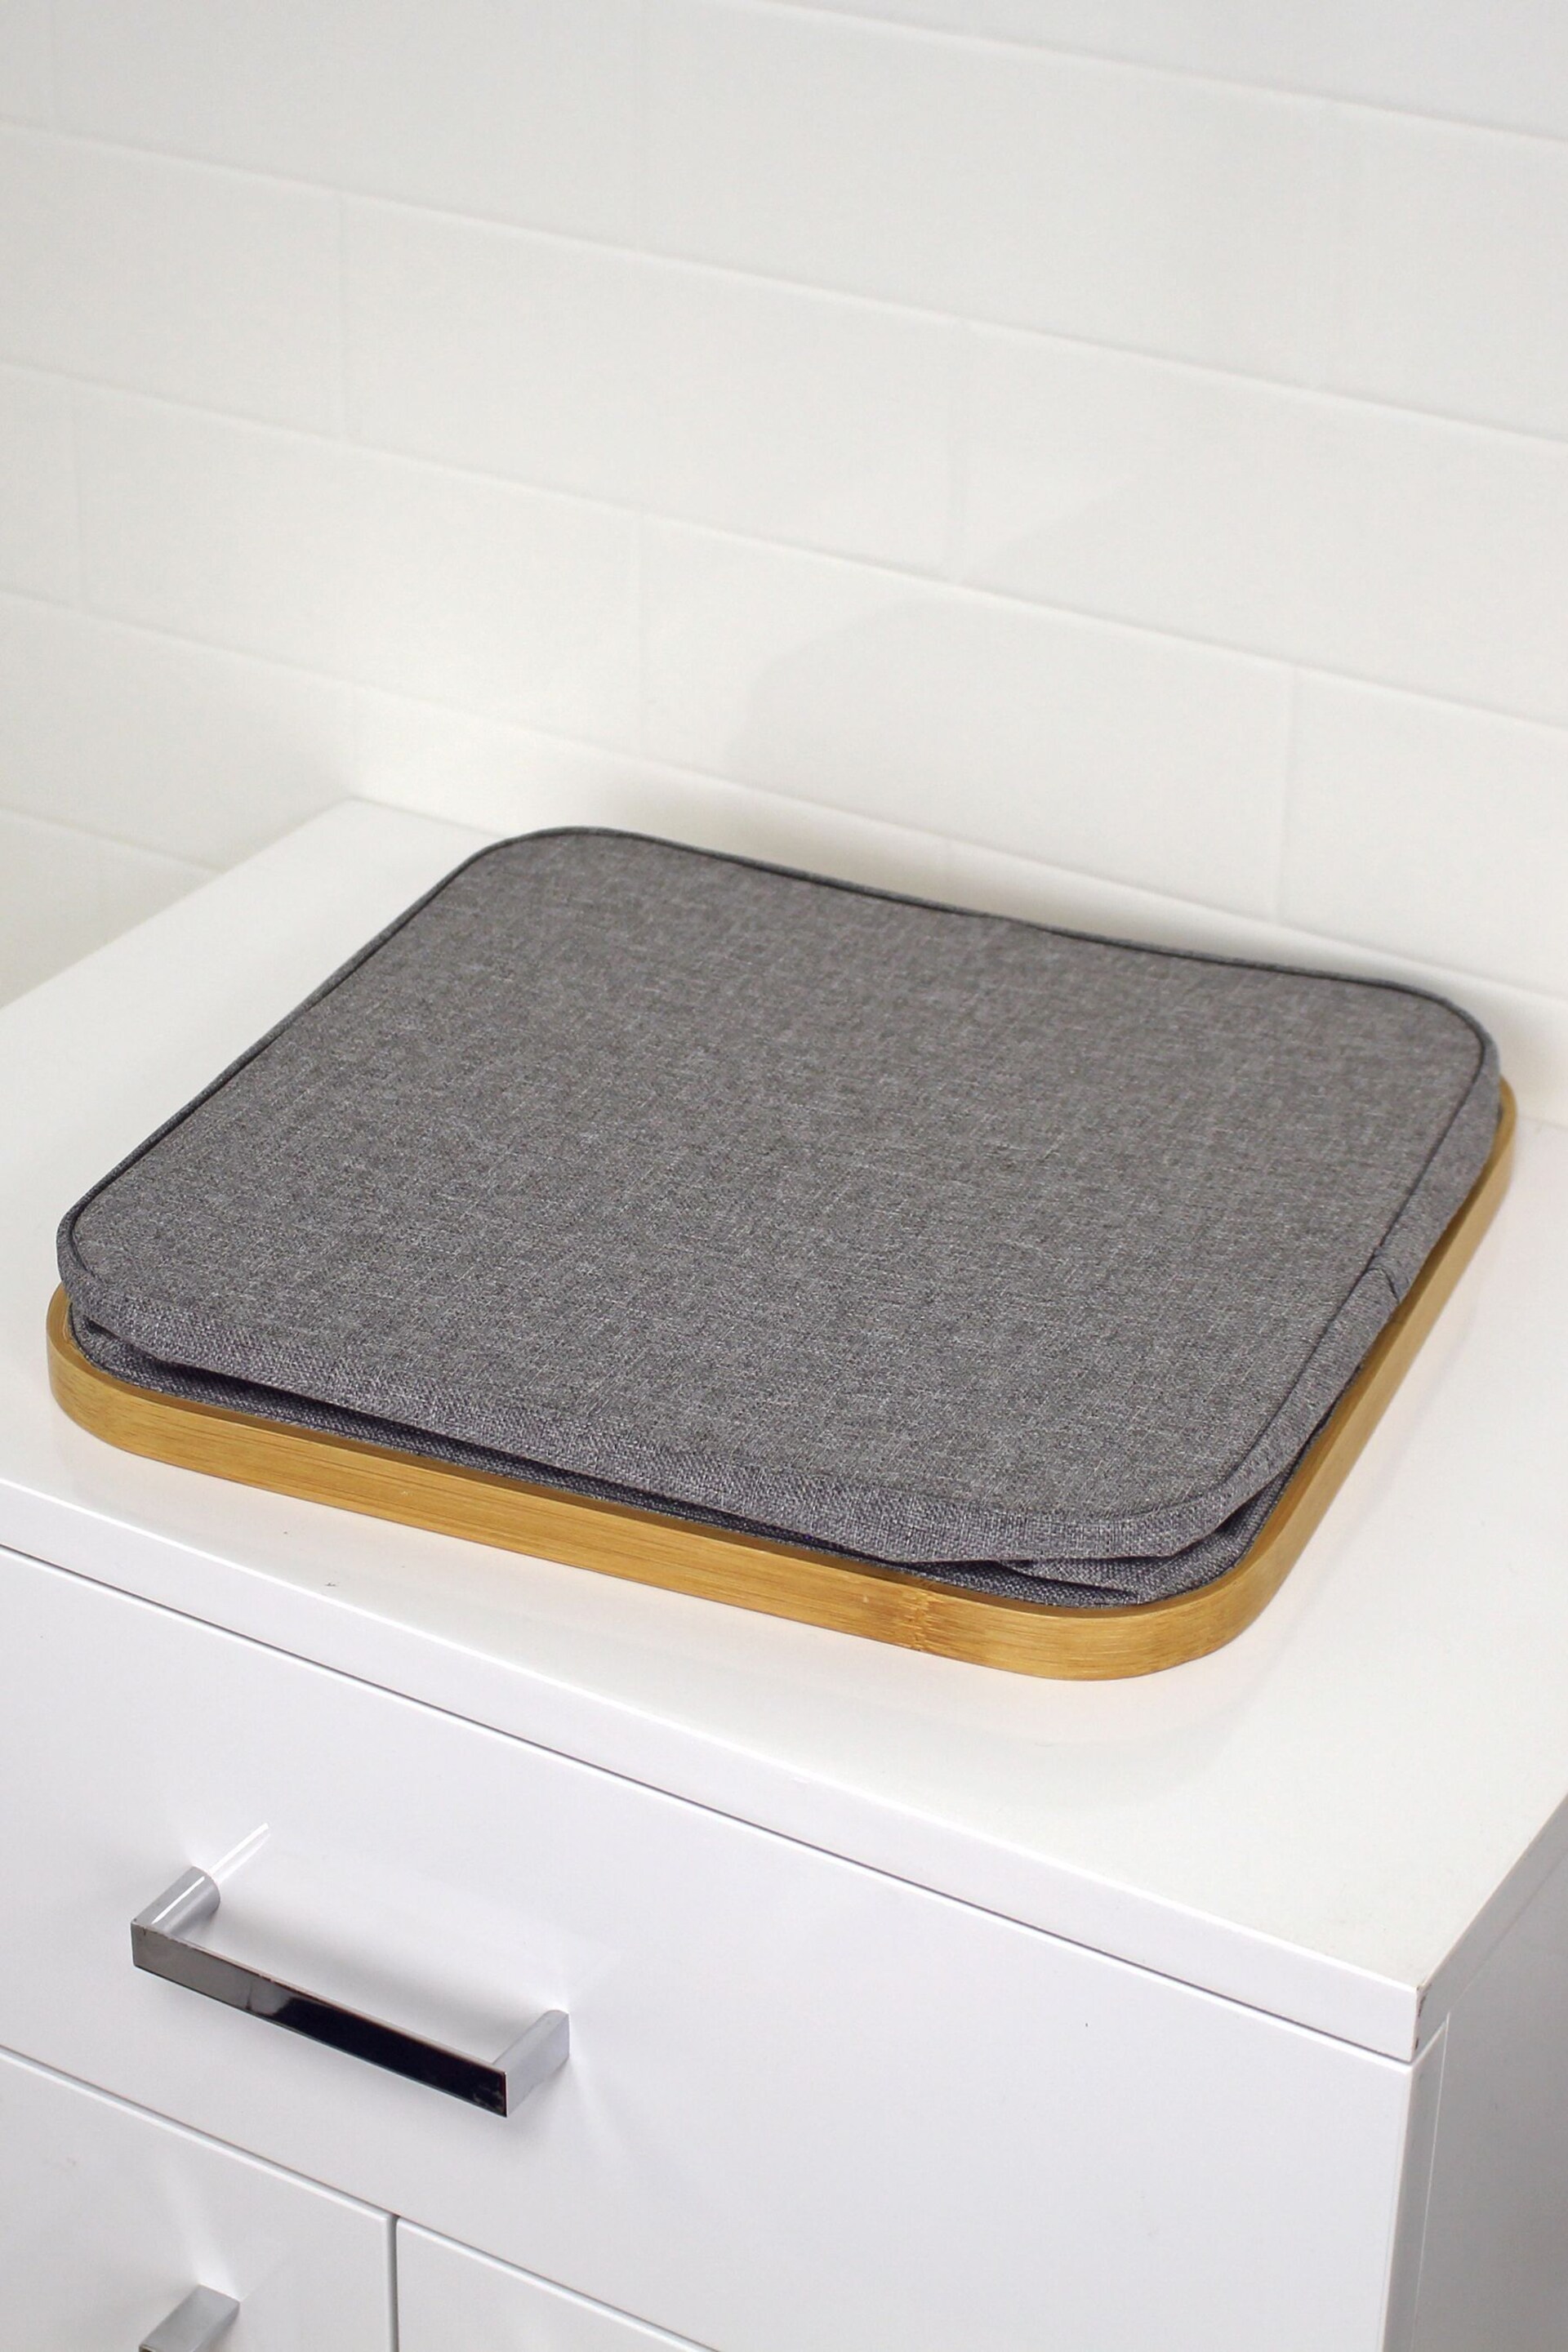 Showerdrape Grey Cotswold Storage Tray with 4 Compartments - Image 3 of 4